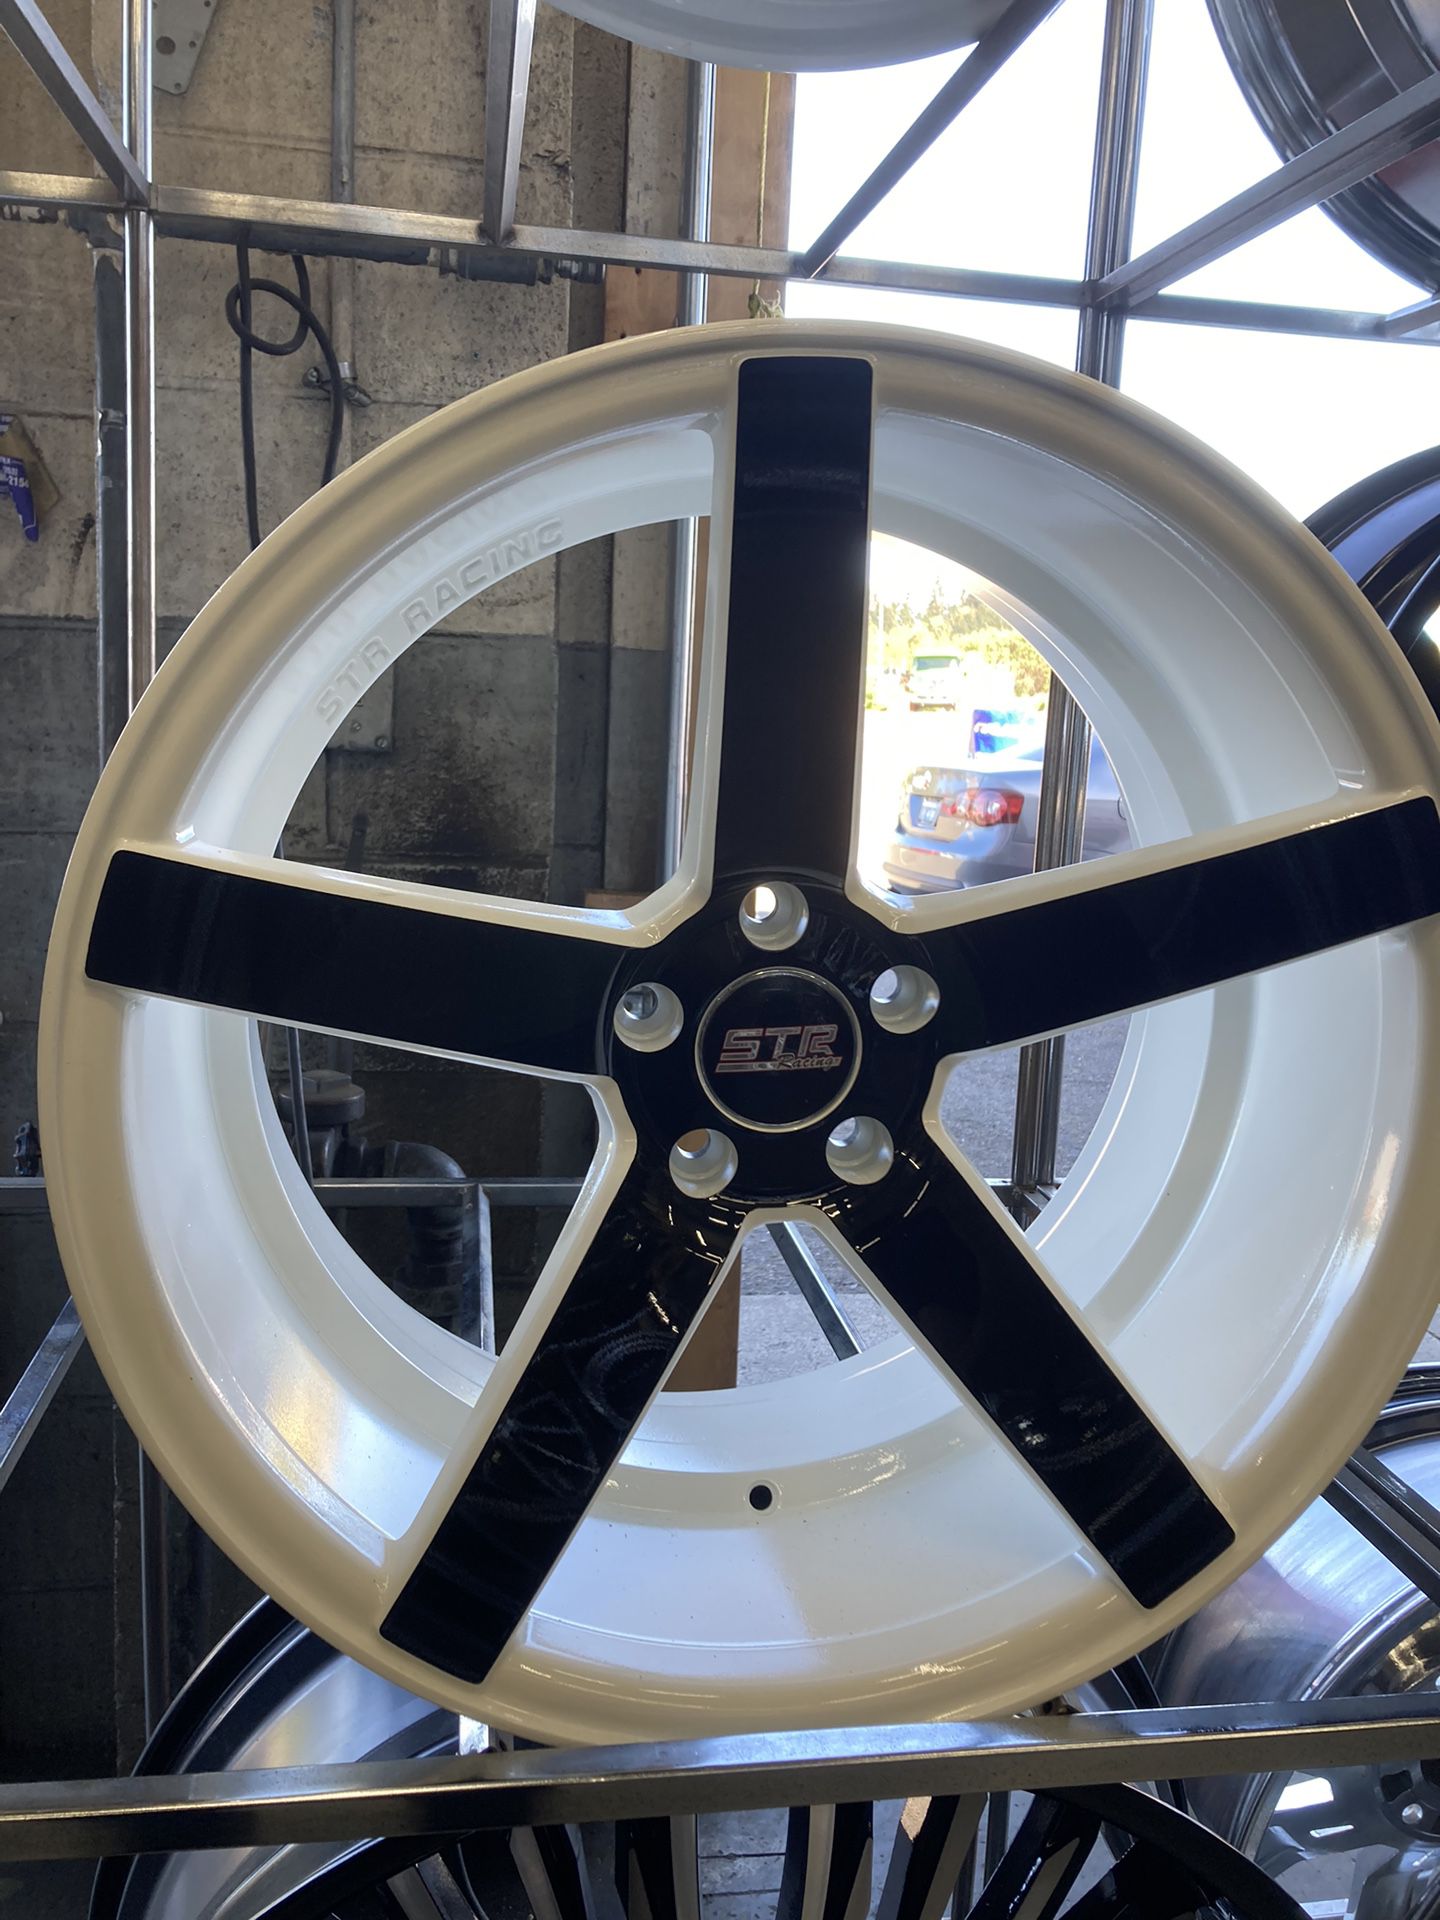 20” Staggered STR Gloss Black /White Rim And Tire Package 